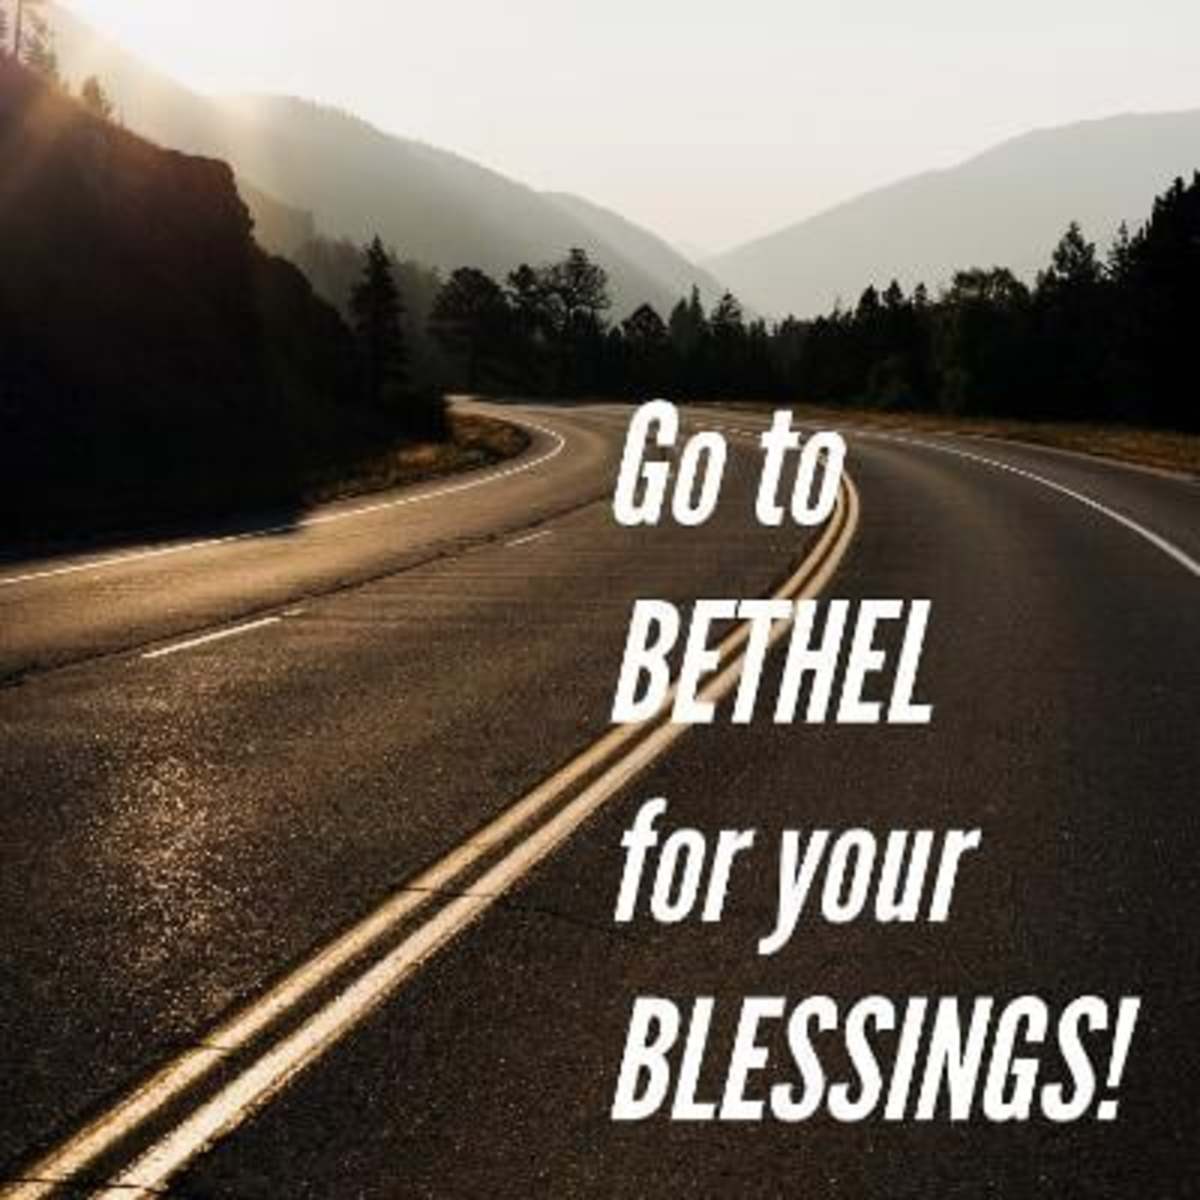 Bethel: Place of Blessings